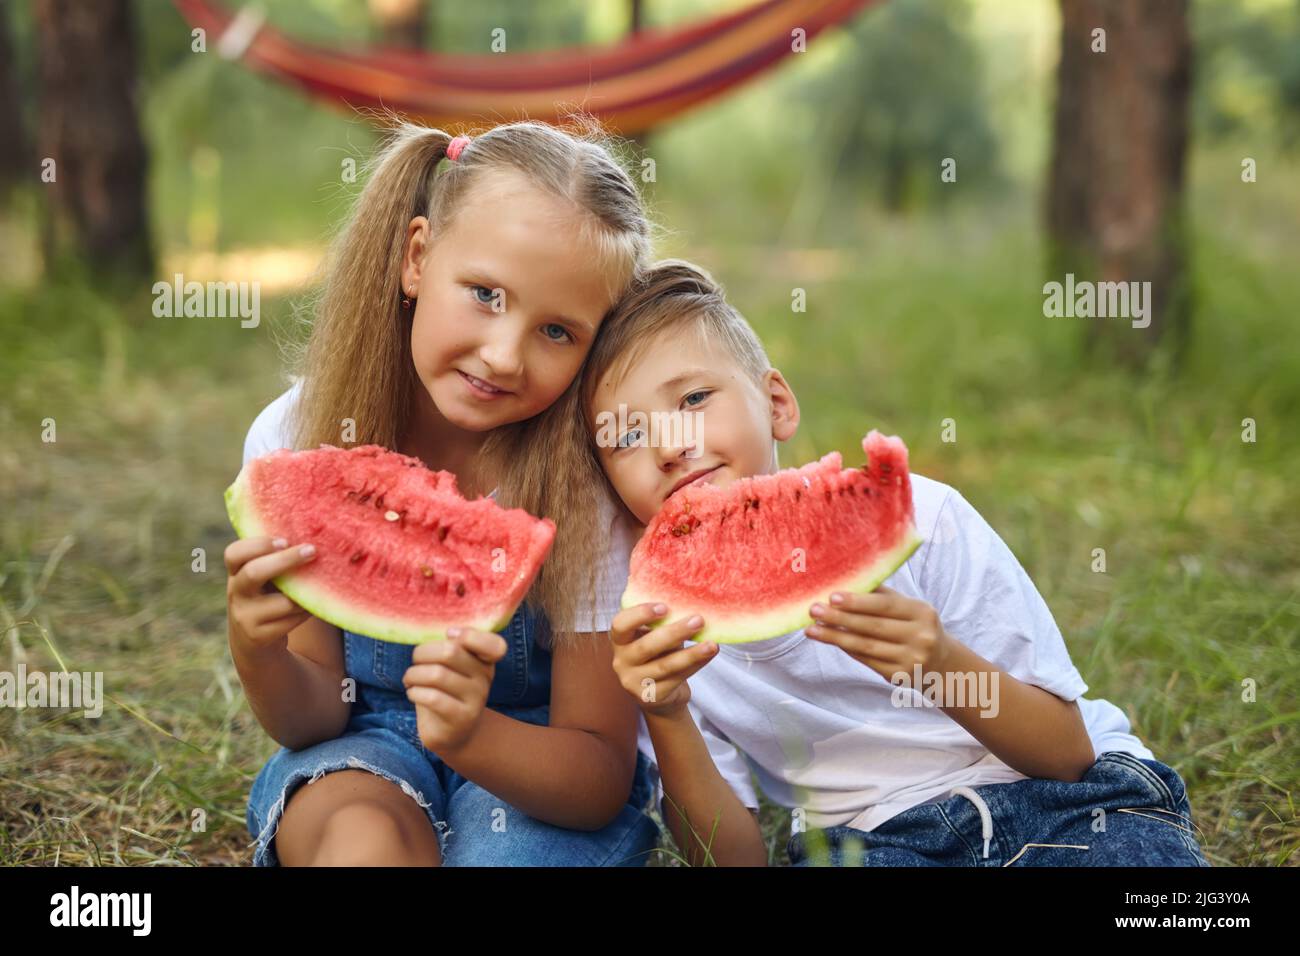 Cute kids eating watermelon in the garden. Stock Photo